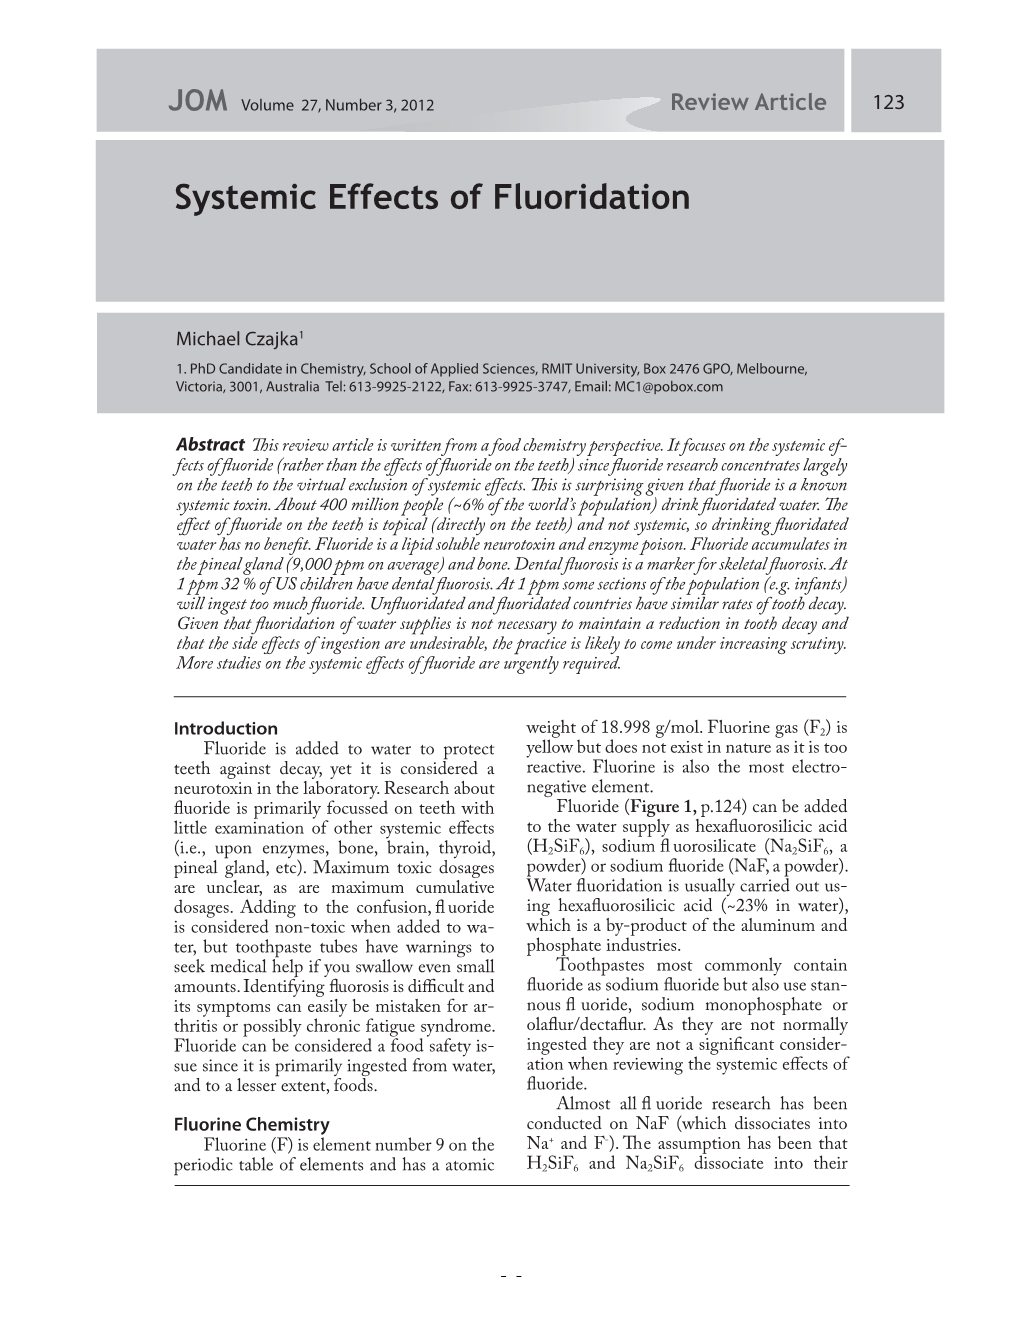 Systemic Effects of Fluoridation